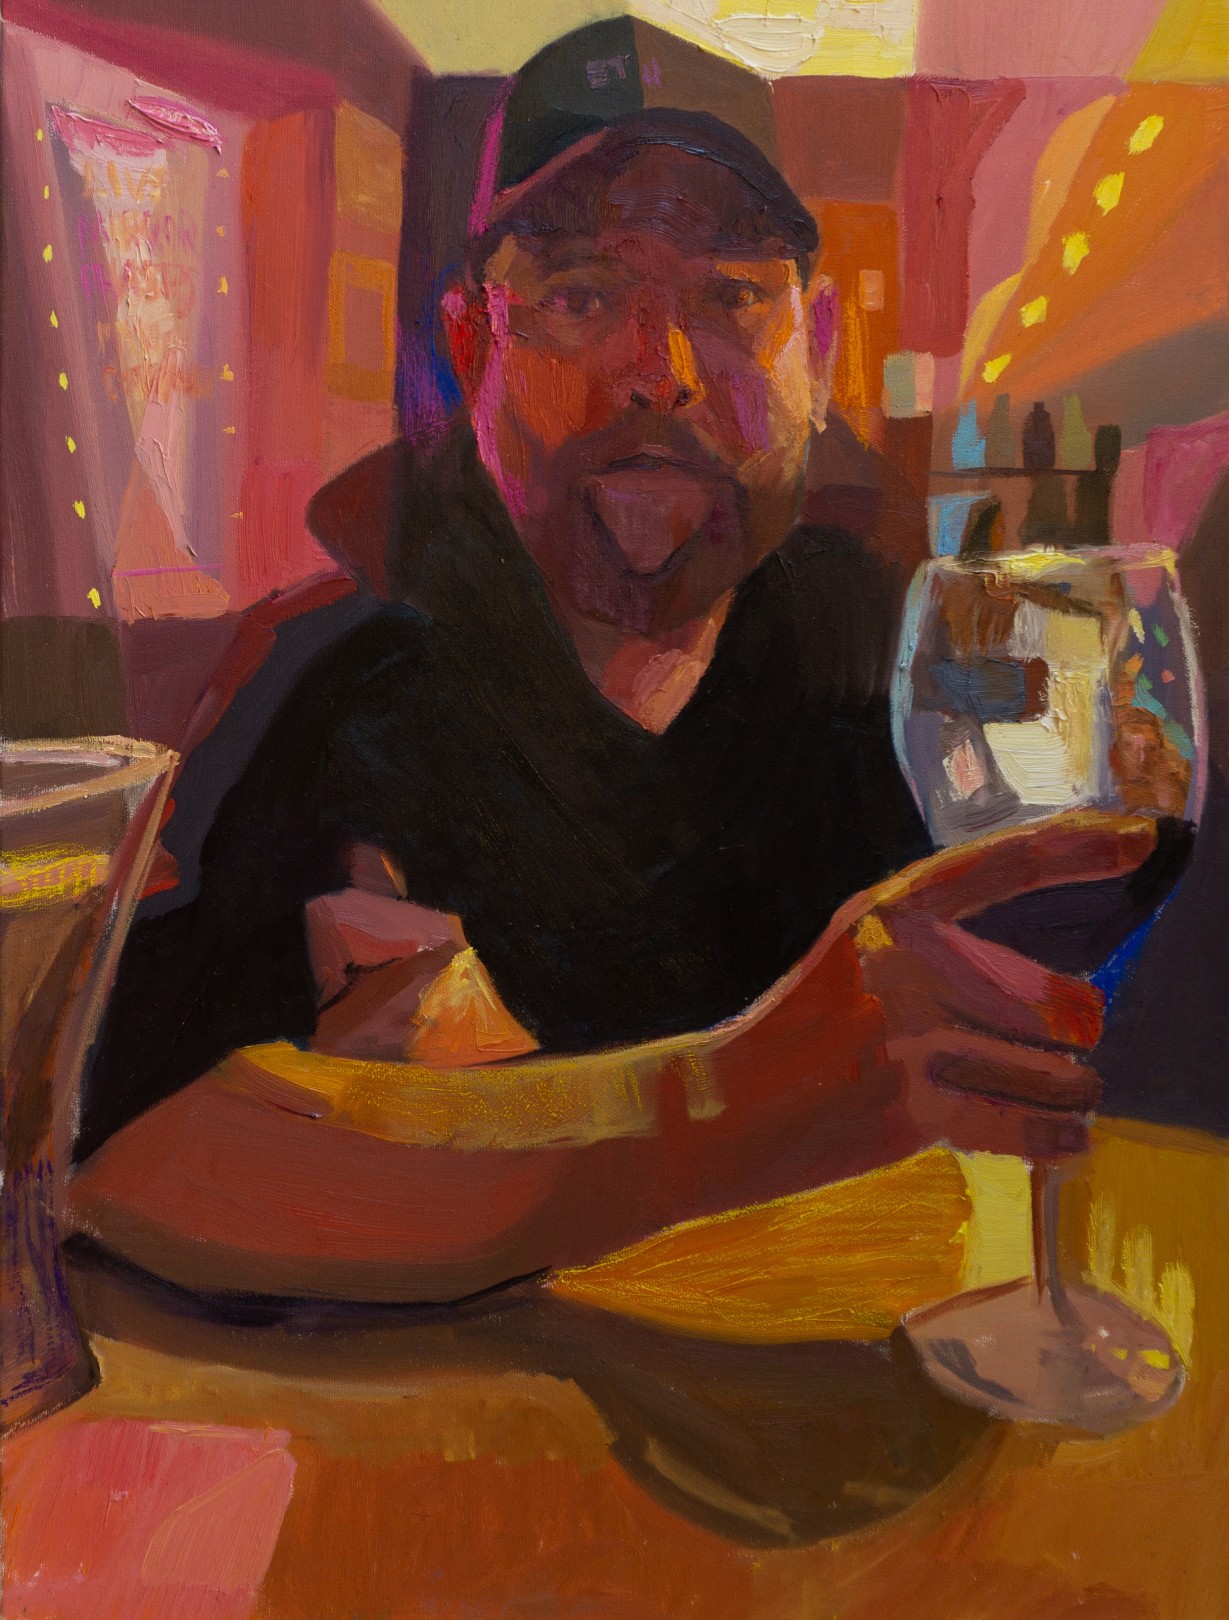 Jeremiah at No Name Bar, 2021 Oil and oil pastel on canvas 61 x 46 cm. / 24 x 18 in.